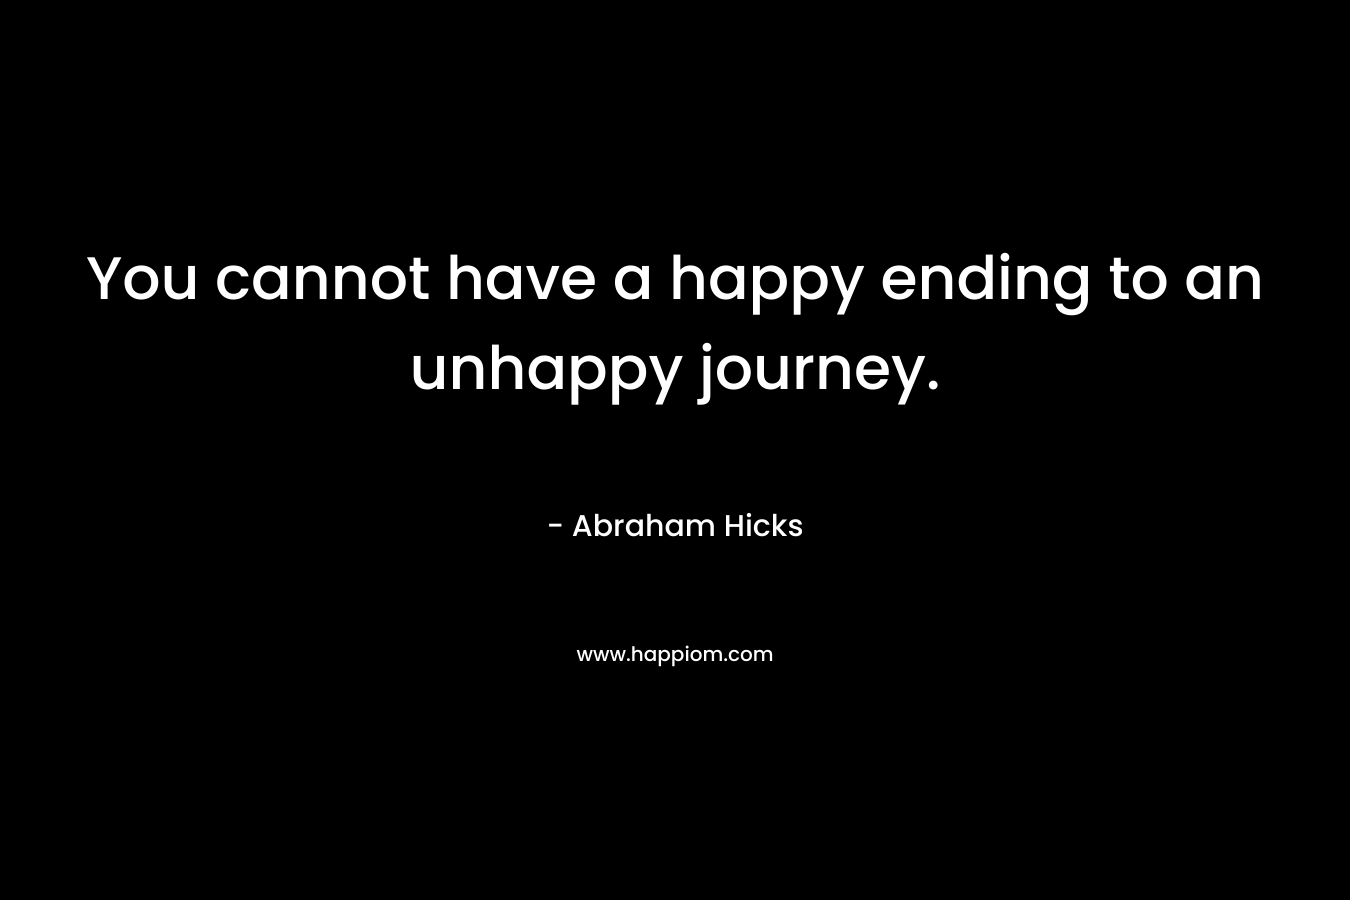 You cannot have a happy ending to an unhappy journey.